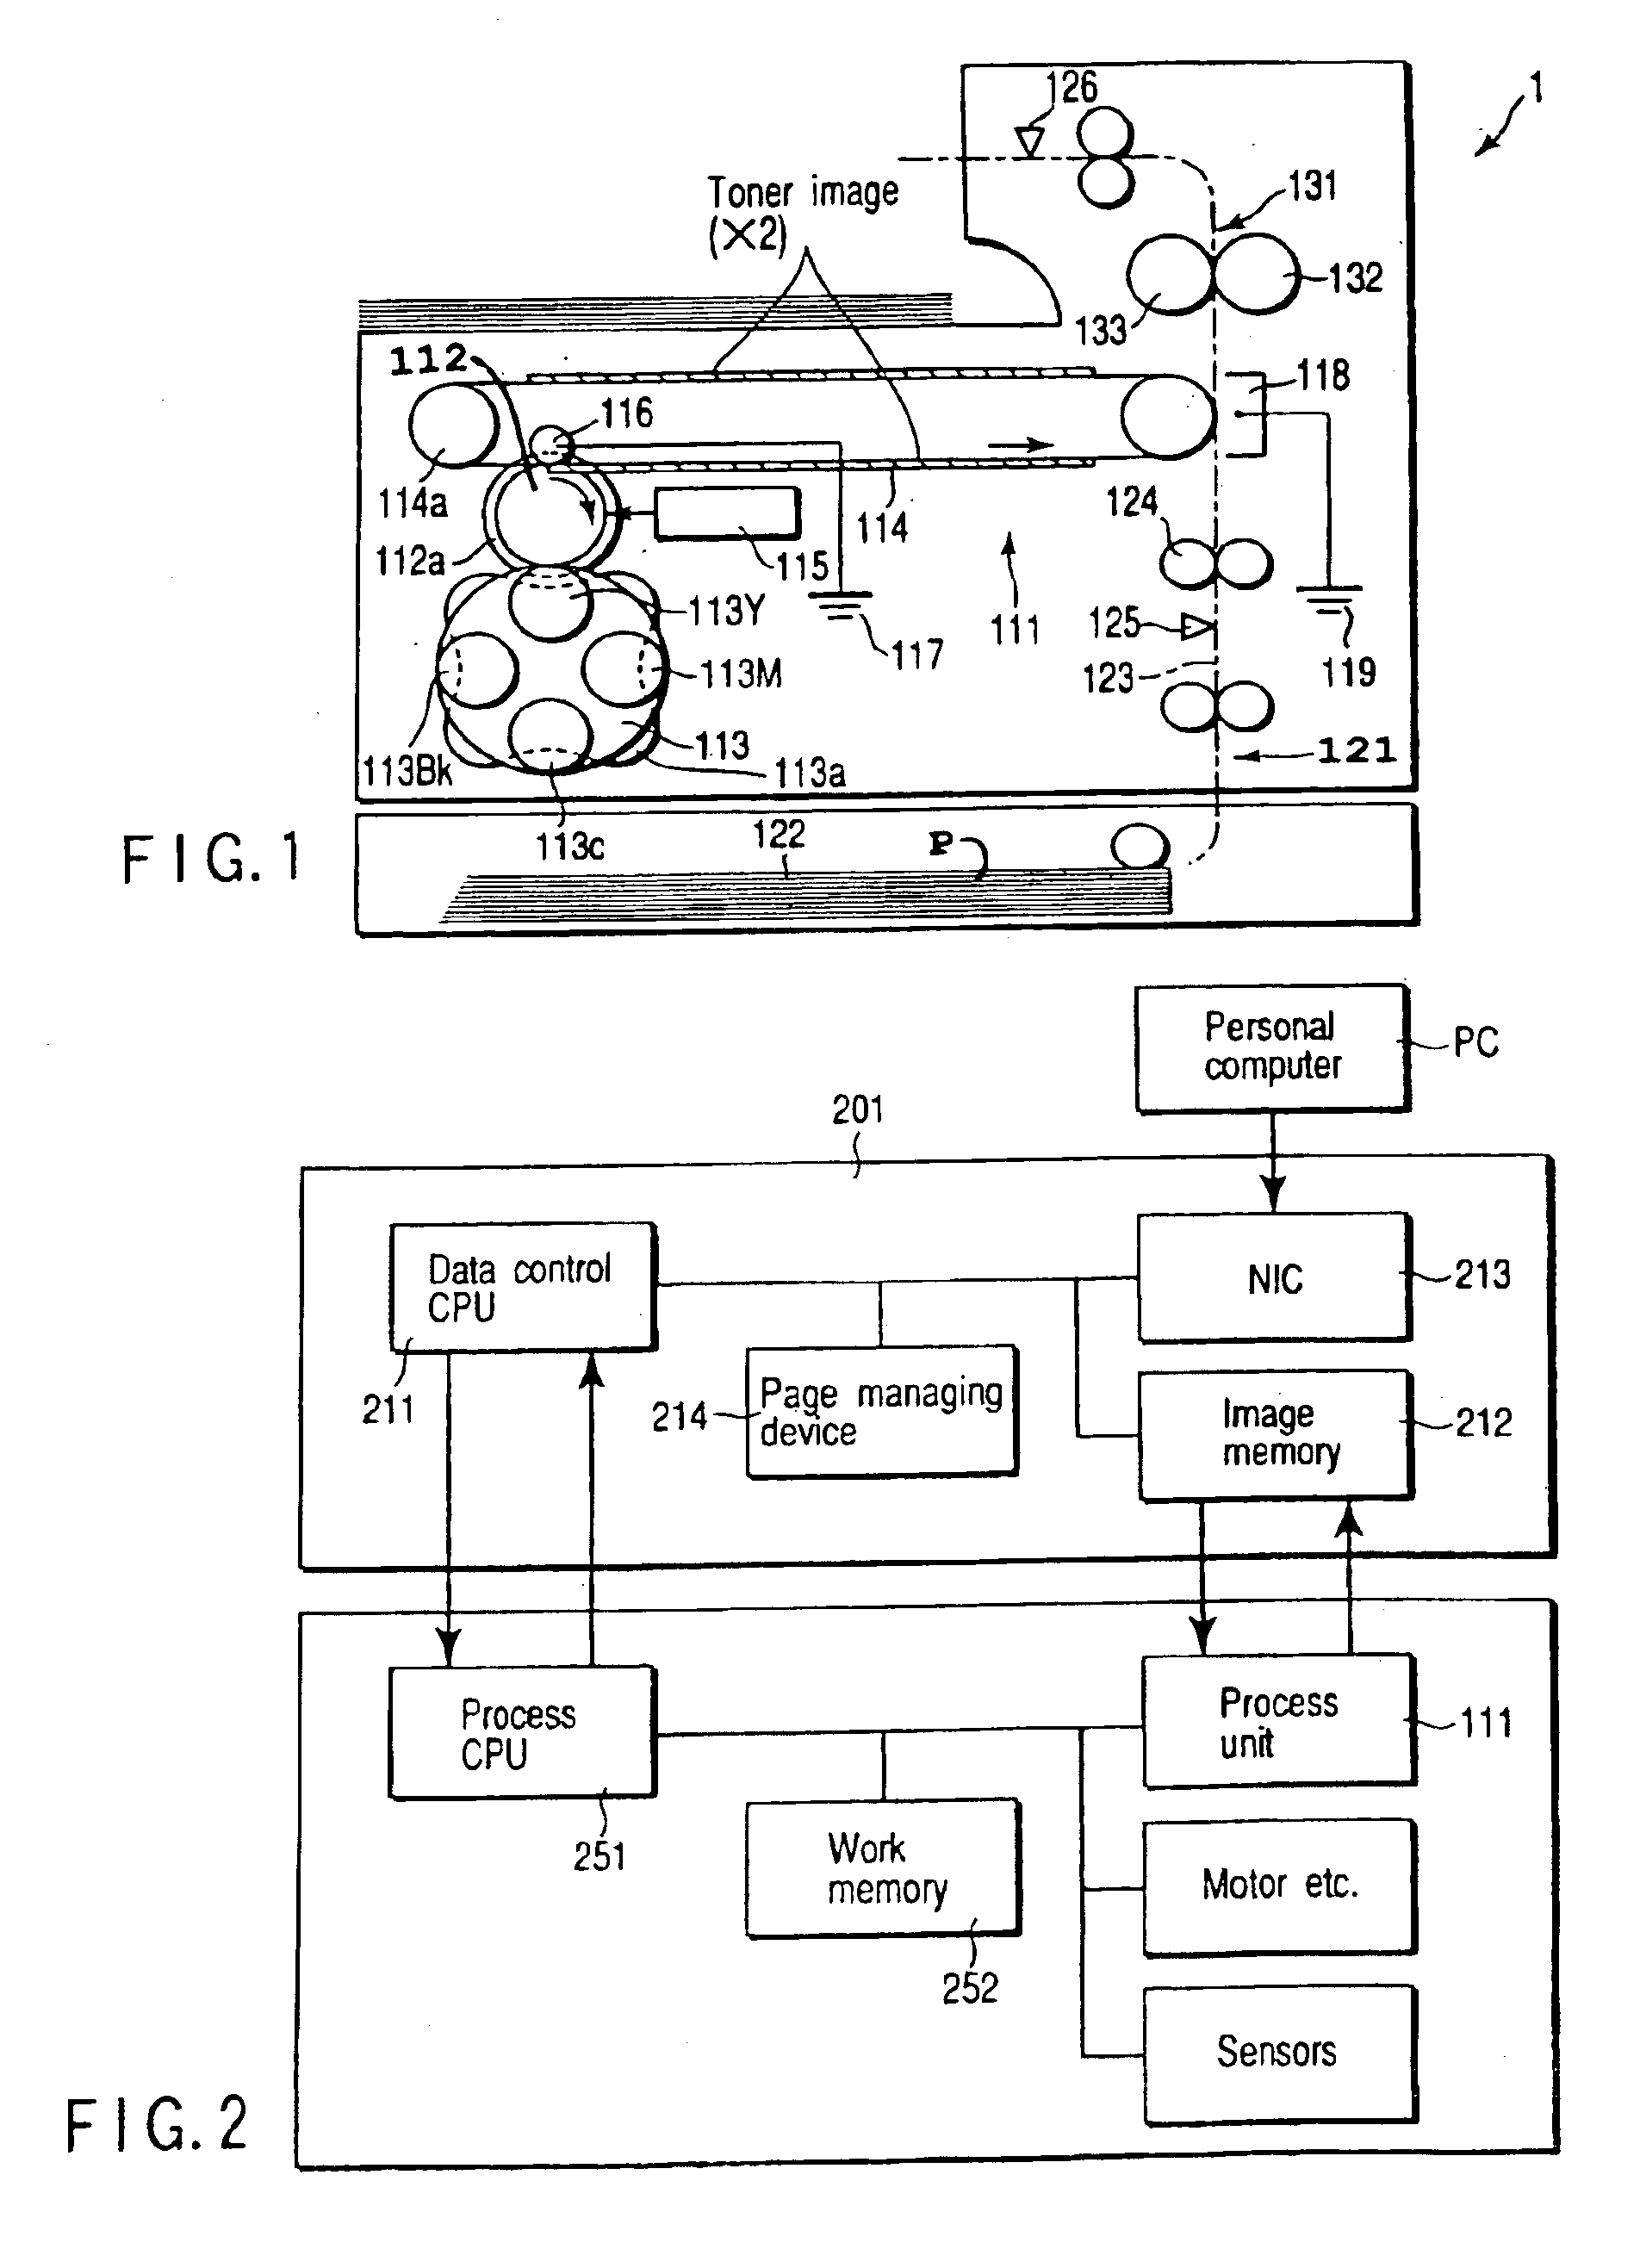 Method and apparatus for forming an image